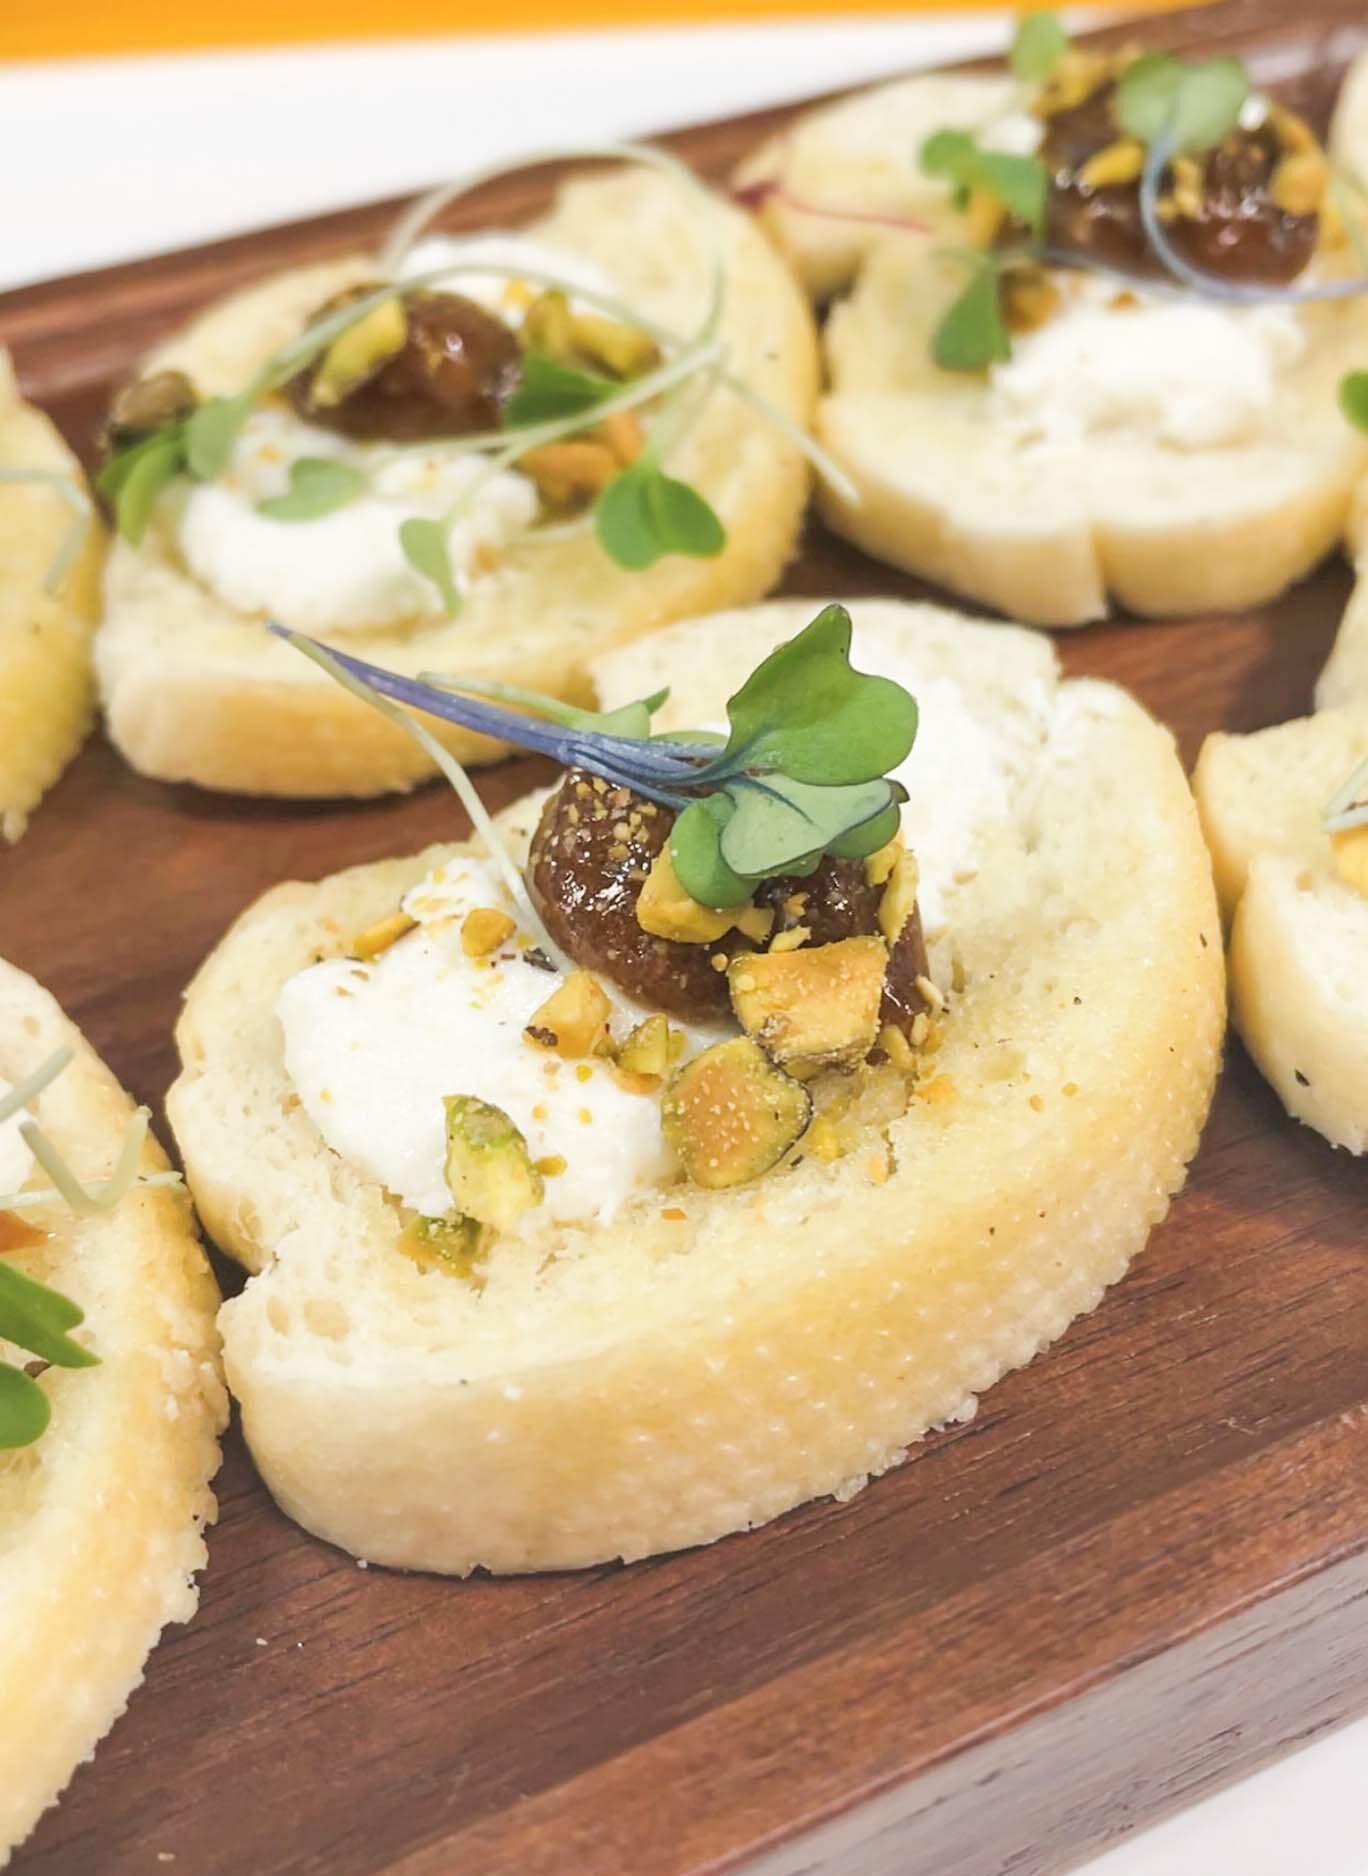 GOAT CHEESE AND PISTACHIO CROSTINI WITH FIG JAM